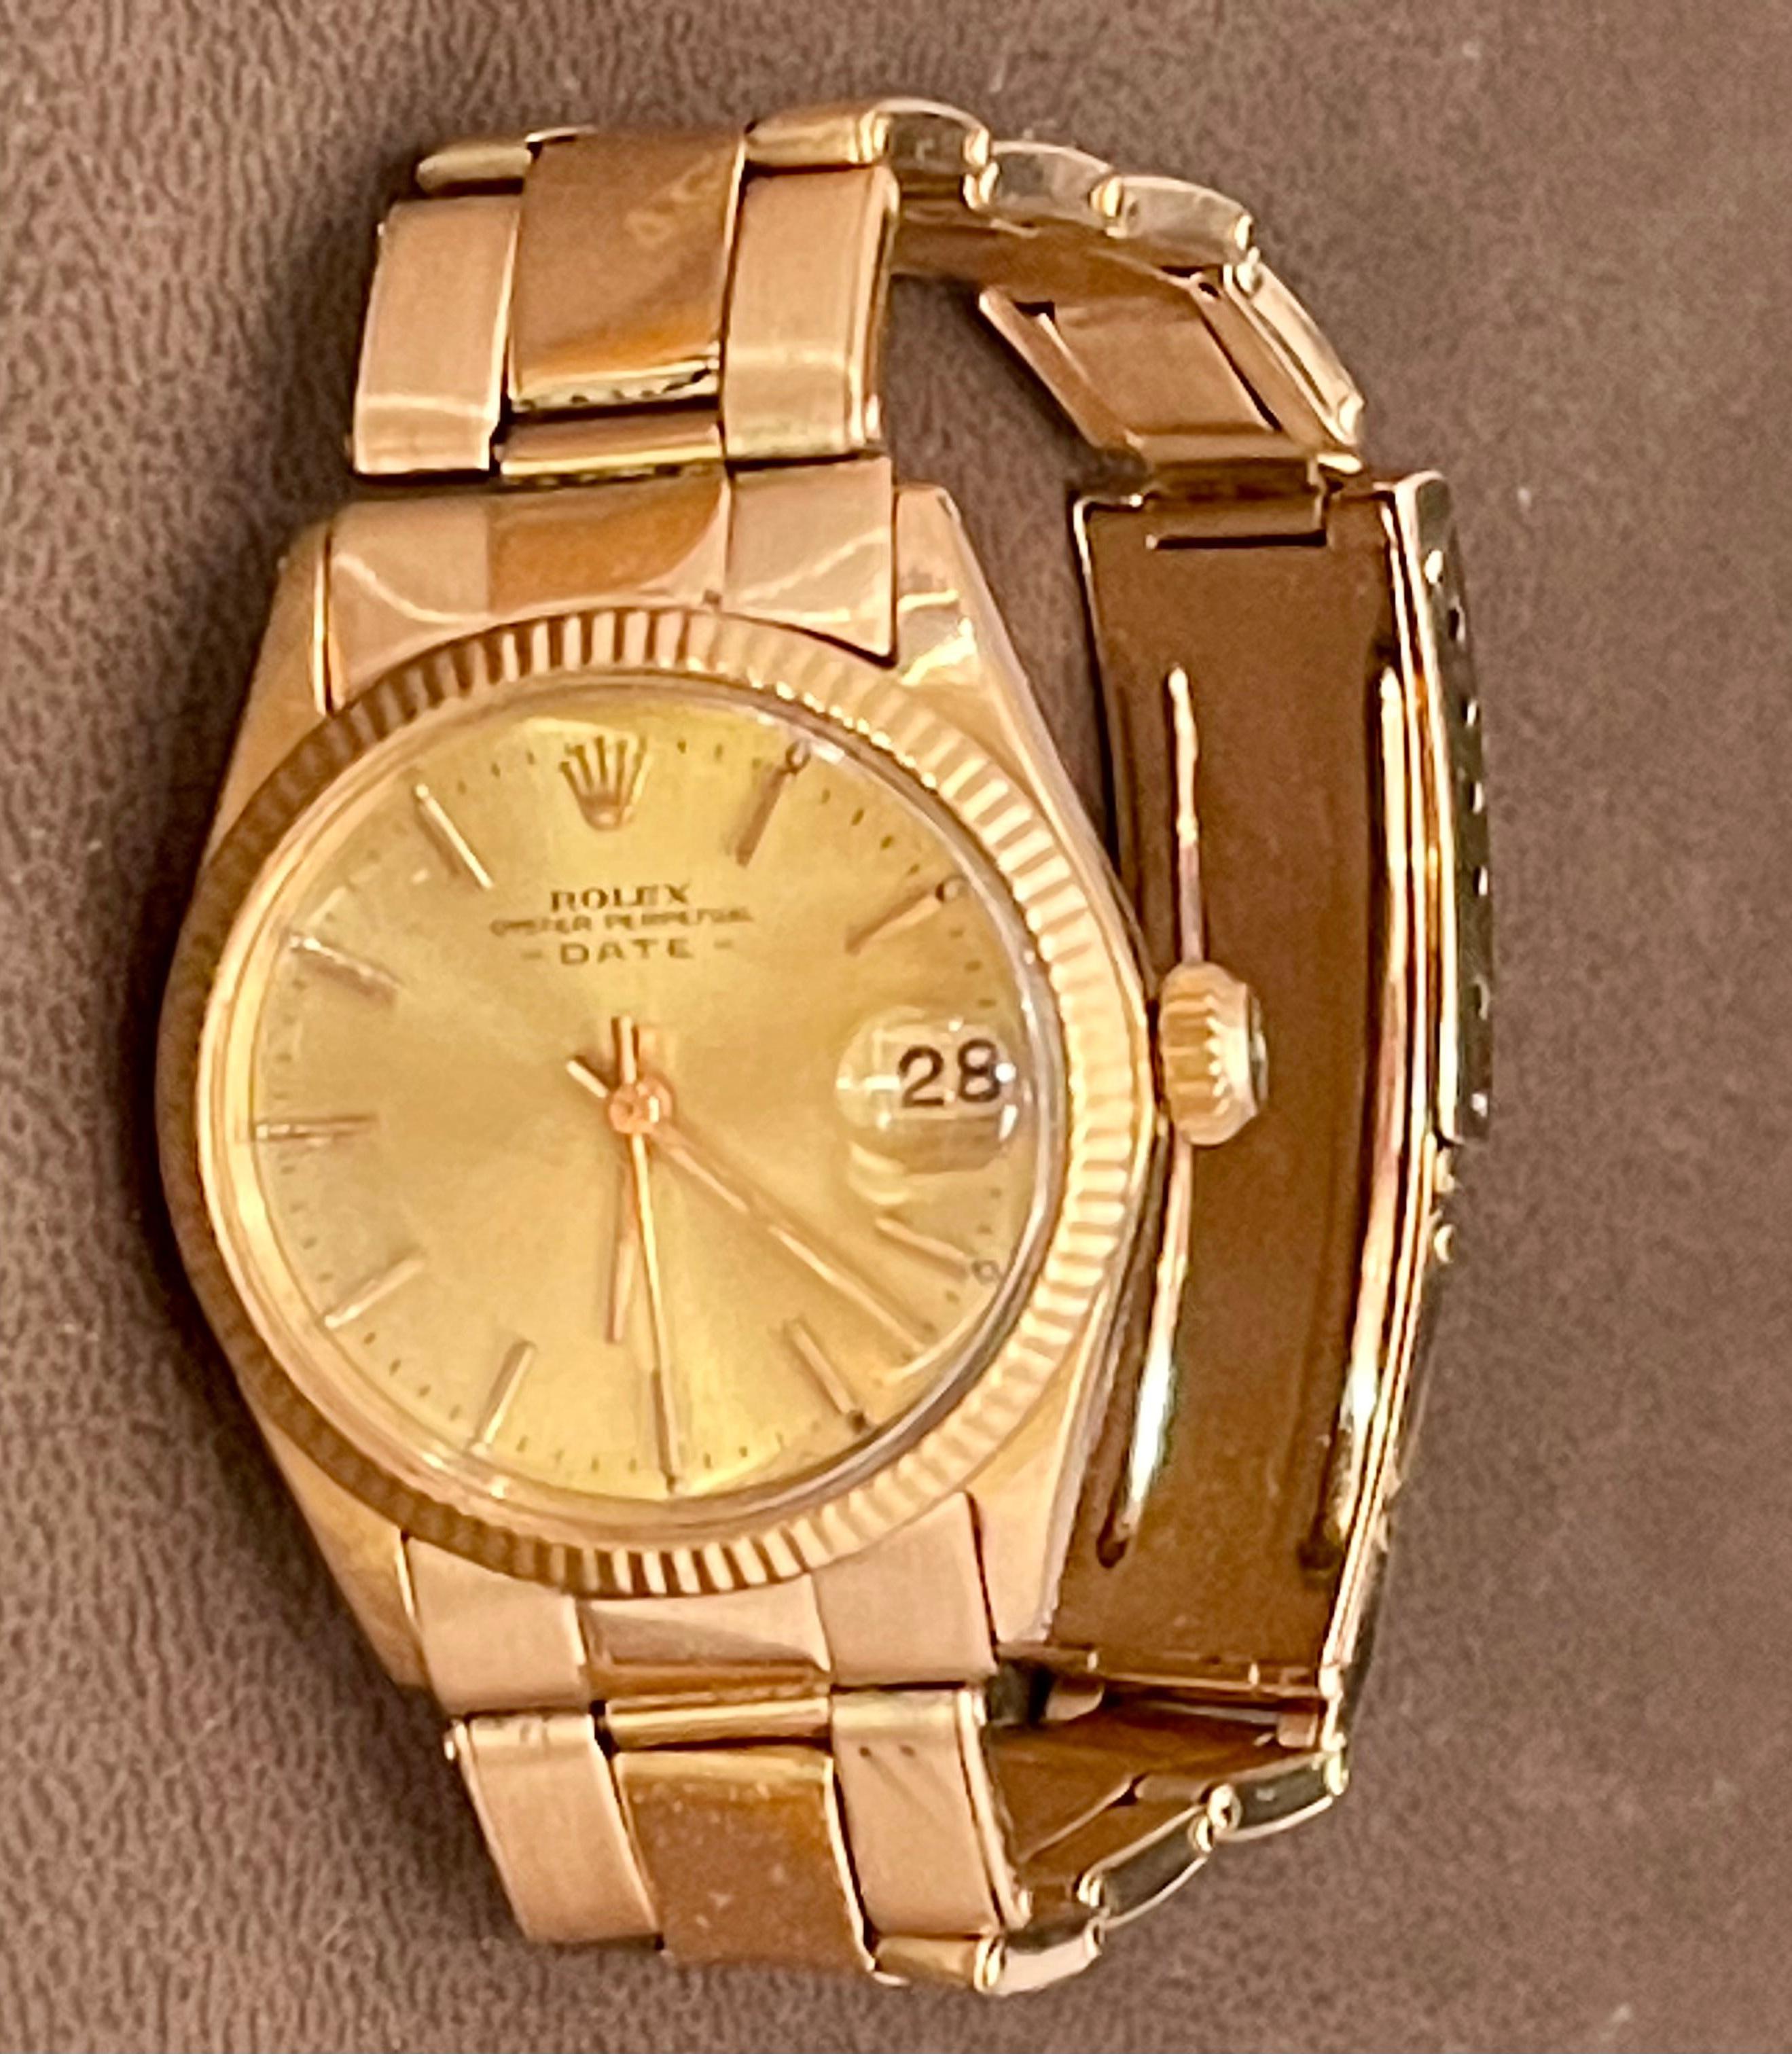 Rolex Oyster Perpatual Lady Datejust 28 Rose Gold  Fluted Bezel Watch
with	18k Everose gold Oyster w/ Oysterclasp
Metal: 18K Yellow Gold
Total Weight: 71.8 grams
- Polished Solid 18k Rose  Gold 
Features round style case (26 mm) with cream dial and